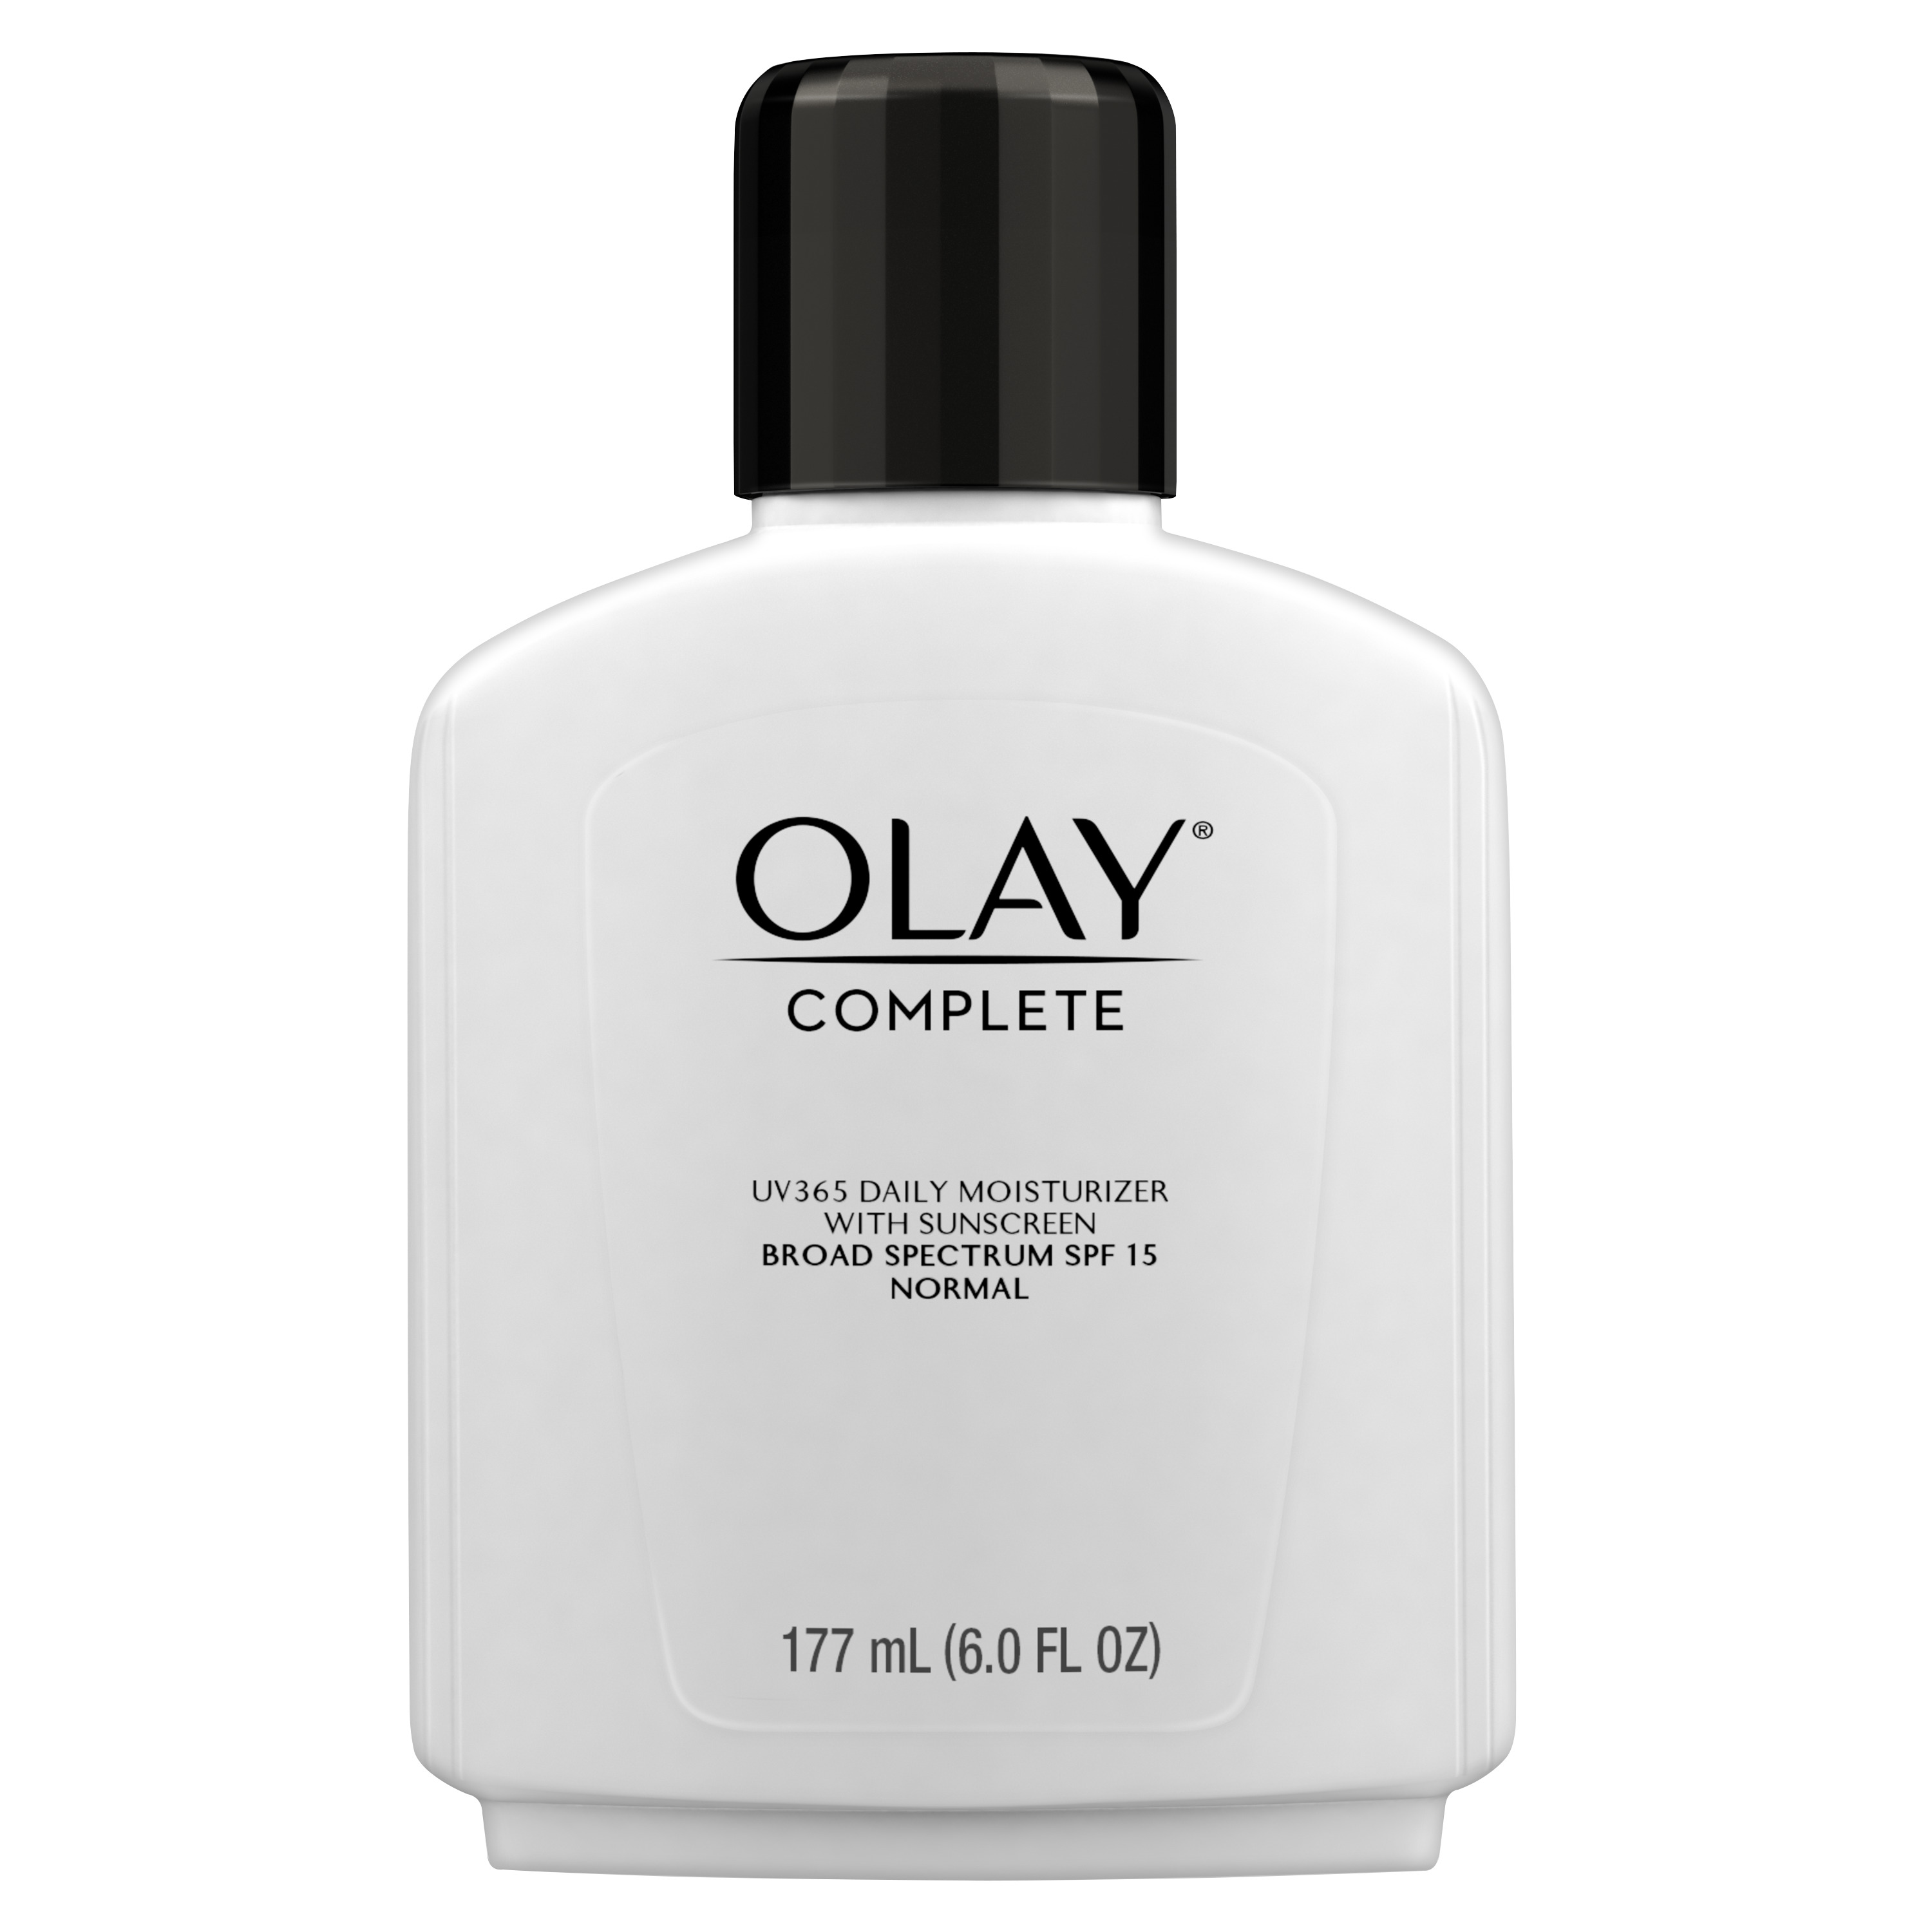 Olay Skincare Complete Lotion Facial Moisturizer with SPF 15 Sun Protection, 6.0 fl oz - image 2 of 8